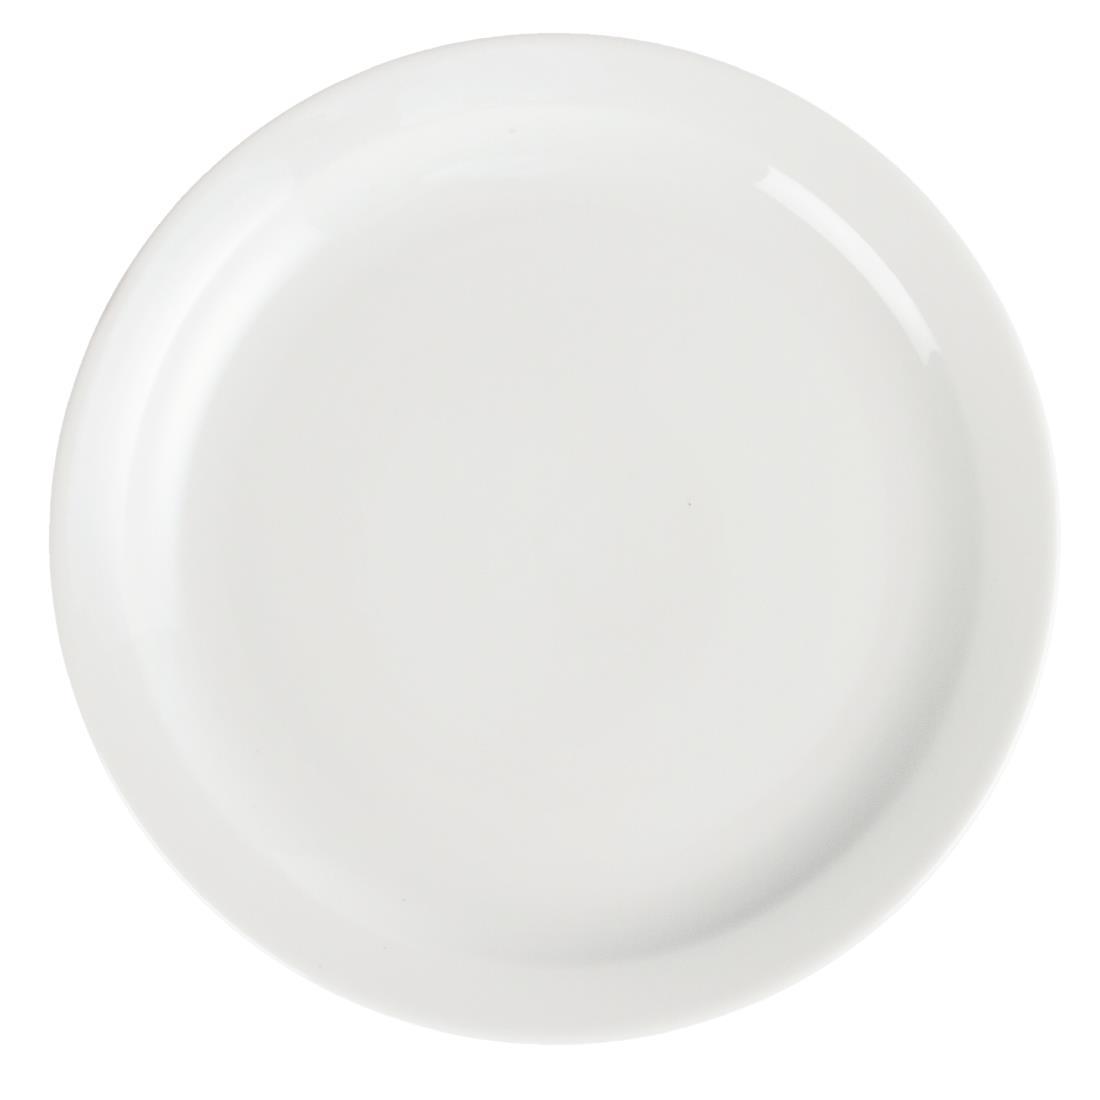 Olympia Whiteware Narrow Rimmed Plates 250mm (Pack of 12) - CB490  - 3